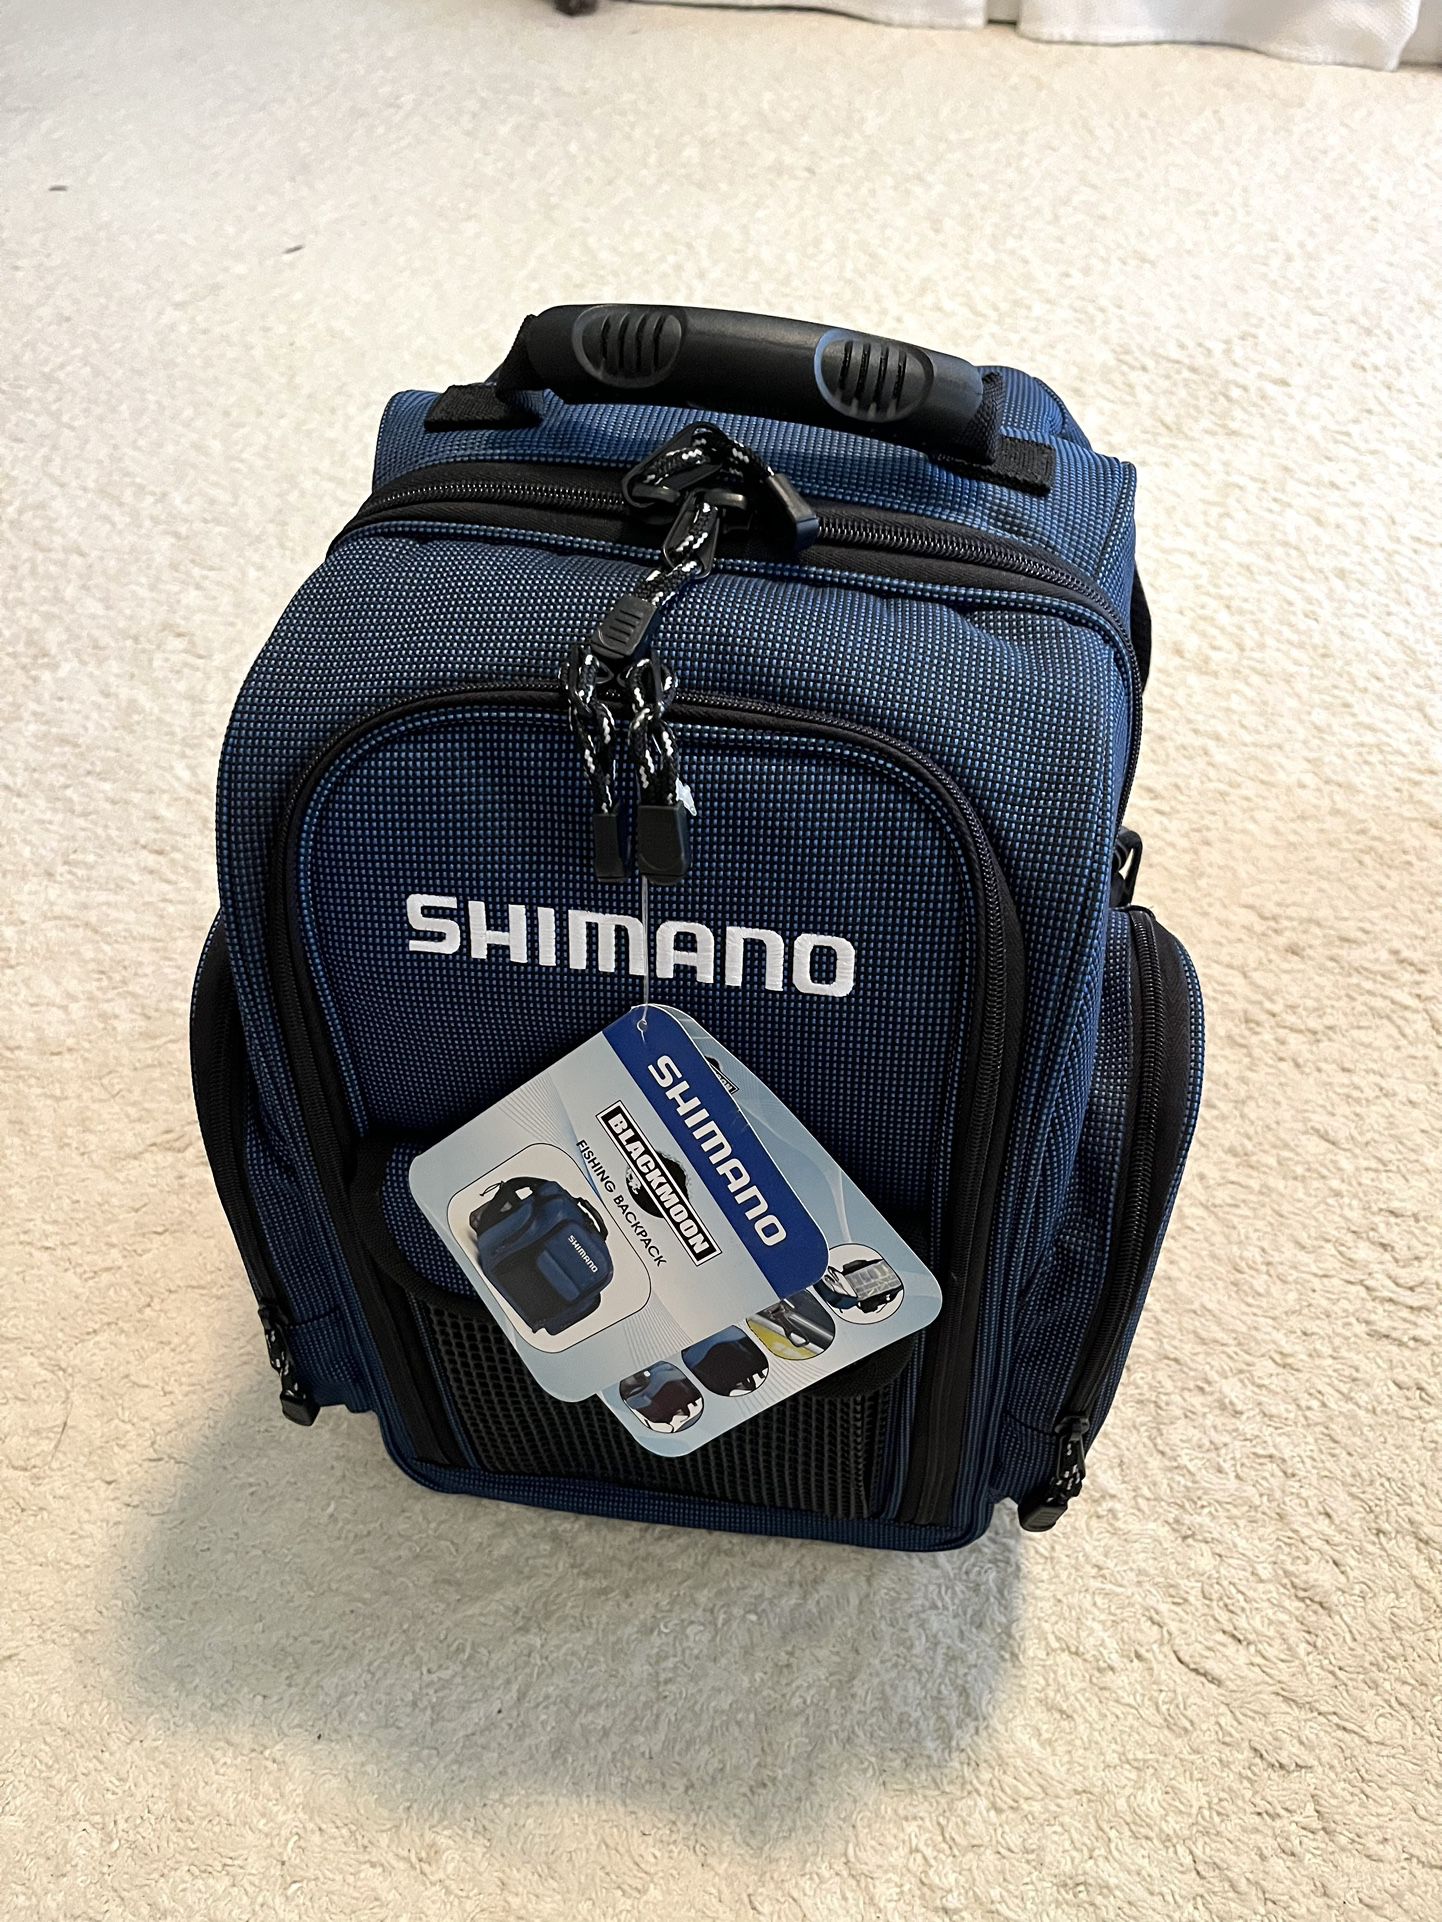 Shimano Blackmoon Fishing Backpack for Sale in Anaheim, CA - OfferUp